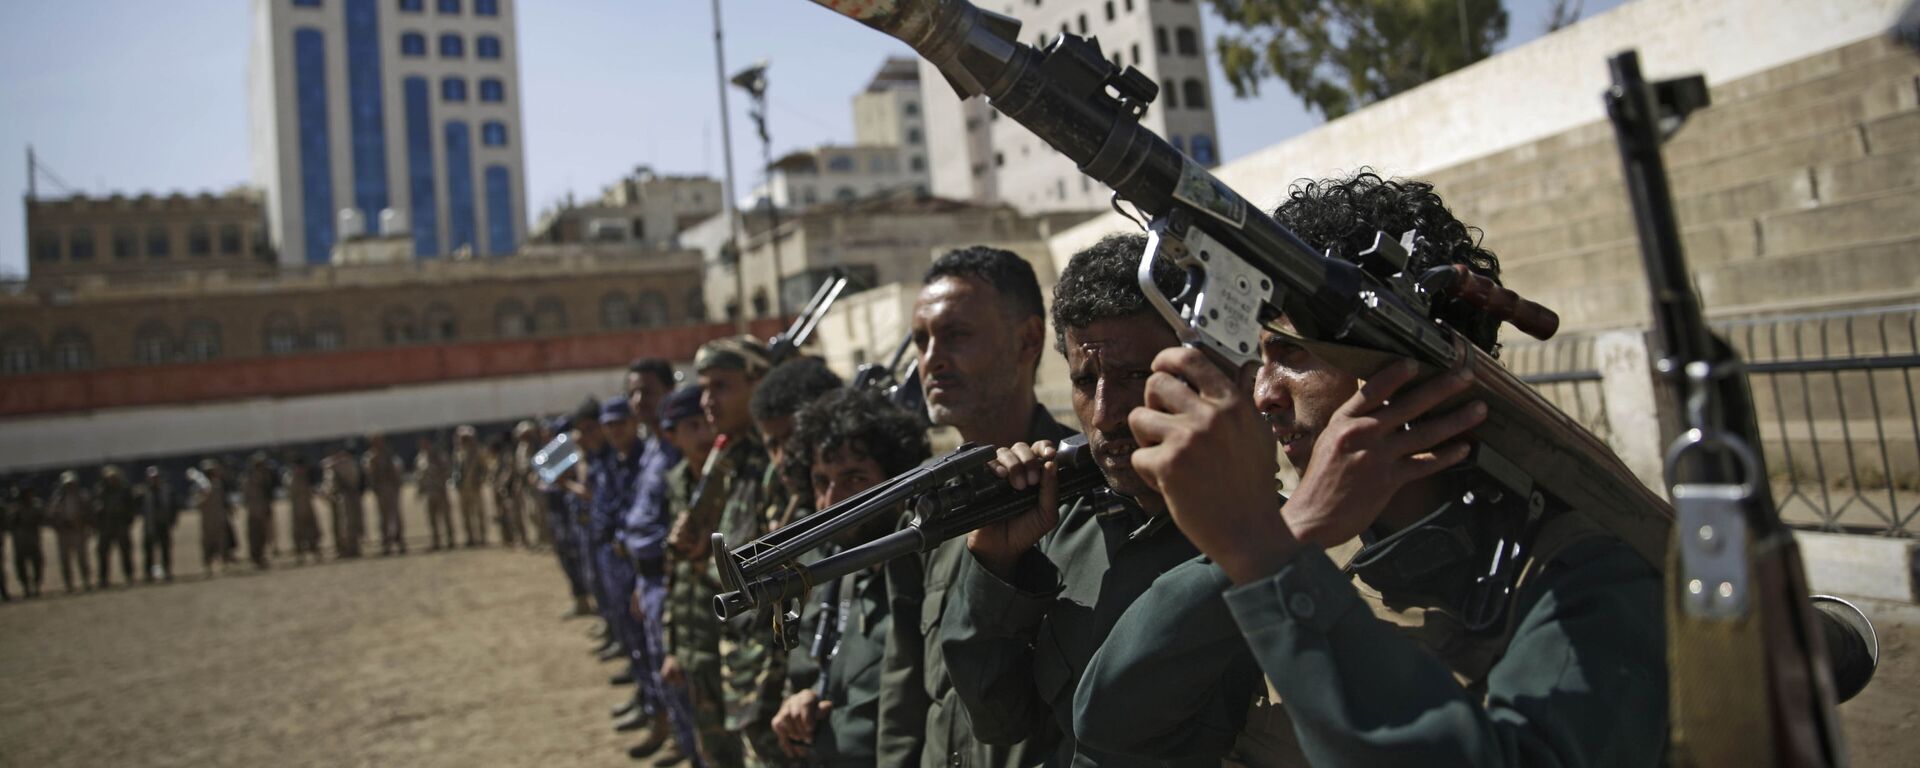 Houthi rebel fighters display their weapons during a gathering aimed at mobilizing more fighters for the Iranian-backed Houthi movement, in Sanaa, Yemen, Thursday, Feb. 20, 2020. The Houthi rebels control the capital, Sanaa, and much of the country’s north, where most of the population lives. They are at war with a U.S.-backed, Saudi-led coalition fighting on behalf of the internationally recognized government. - Sputnik International, 1920, 14.06.2021